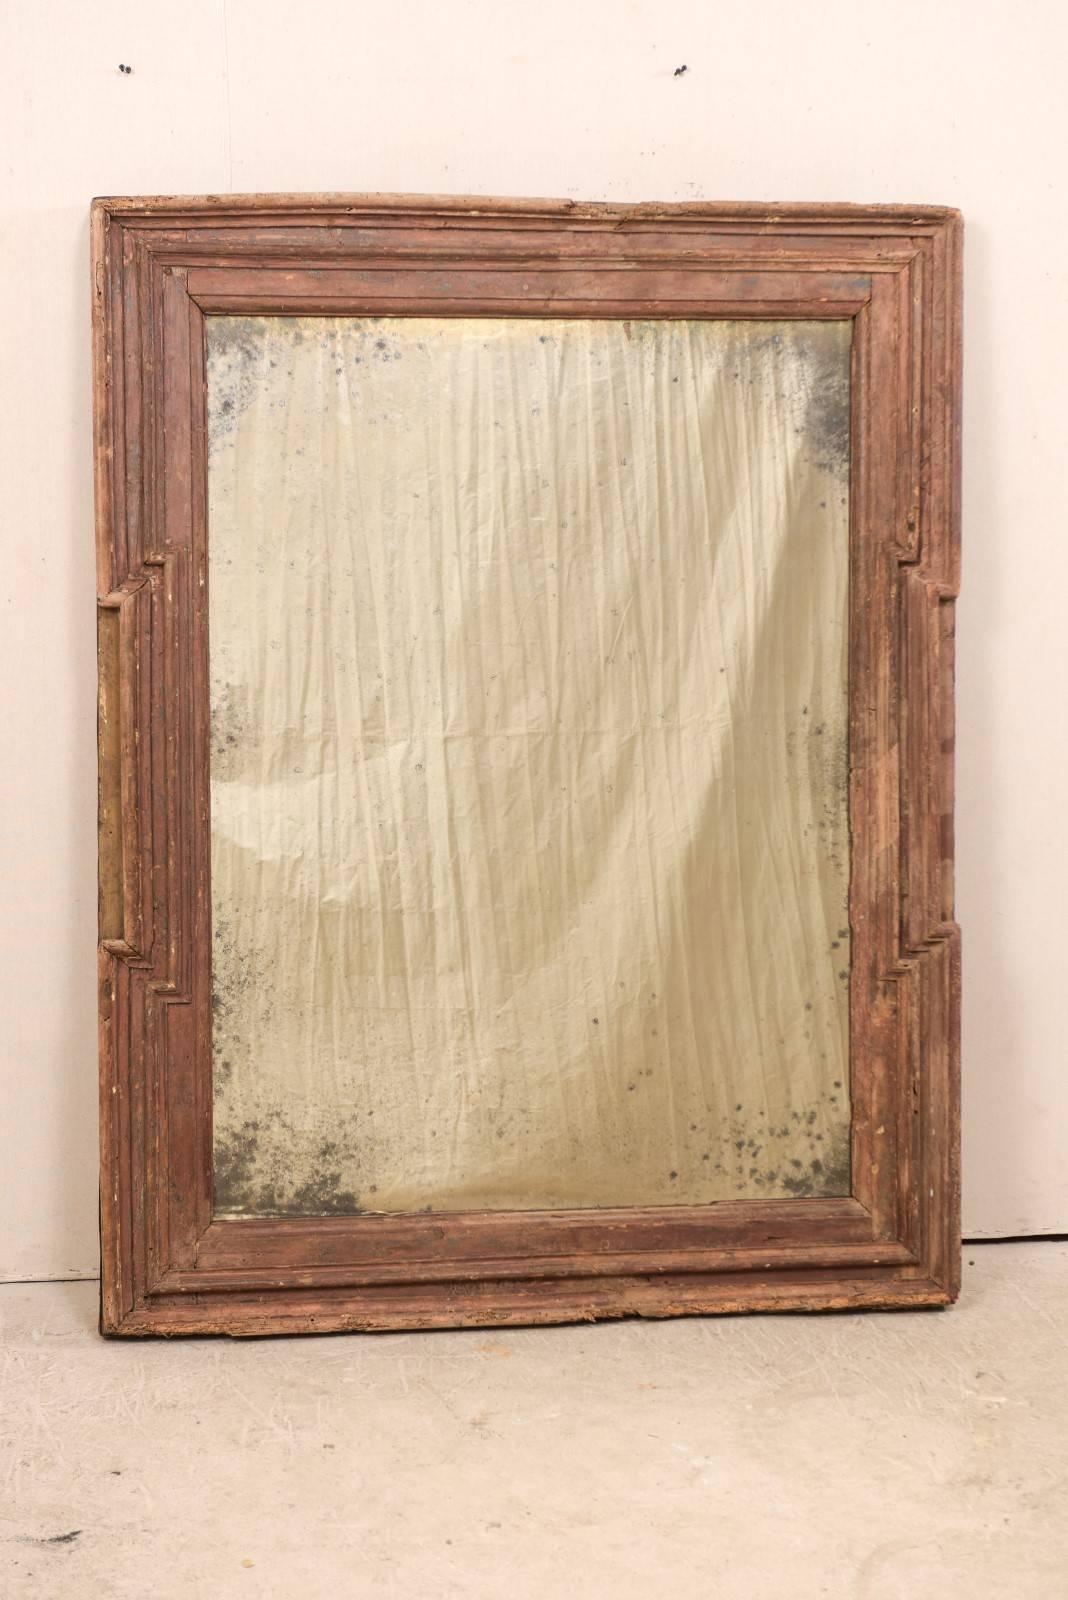 A Spanish 18th century wood rectangular-shaped mirror. This antique mirror from Spain, with it's rectangular shape, has a molded surround with step-in details flanking the trim at either side, and newer, antiqued mirror recessed within it's center.